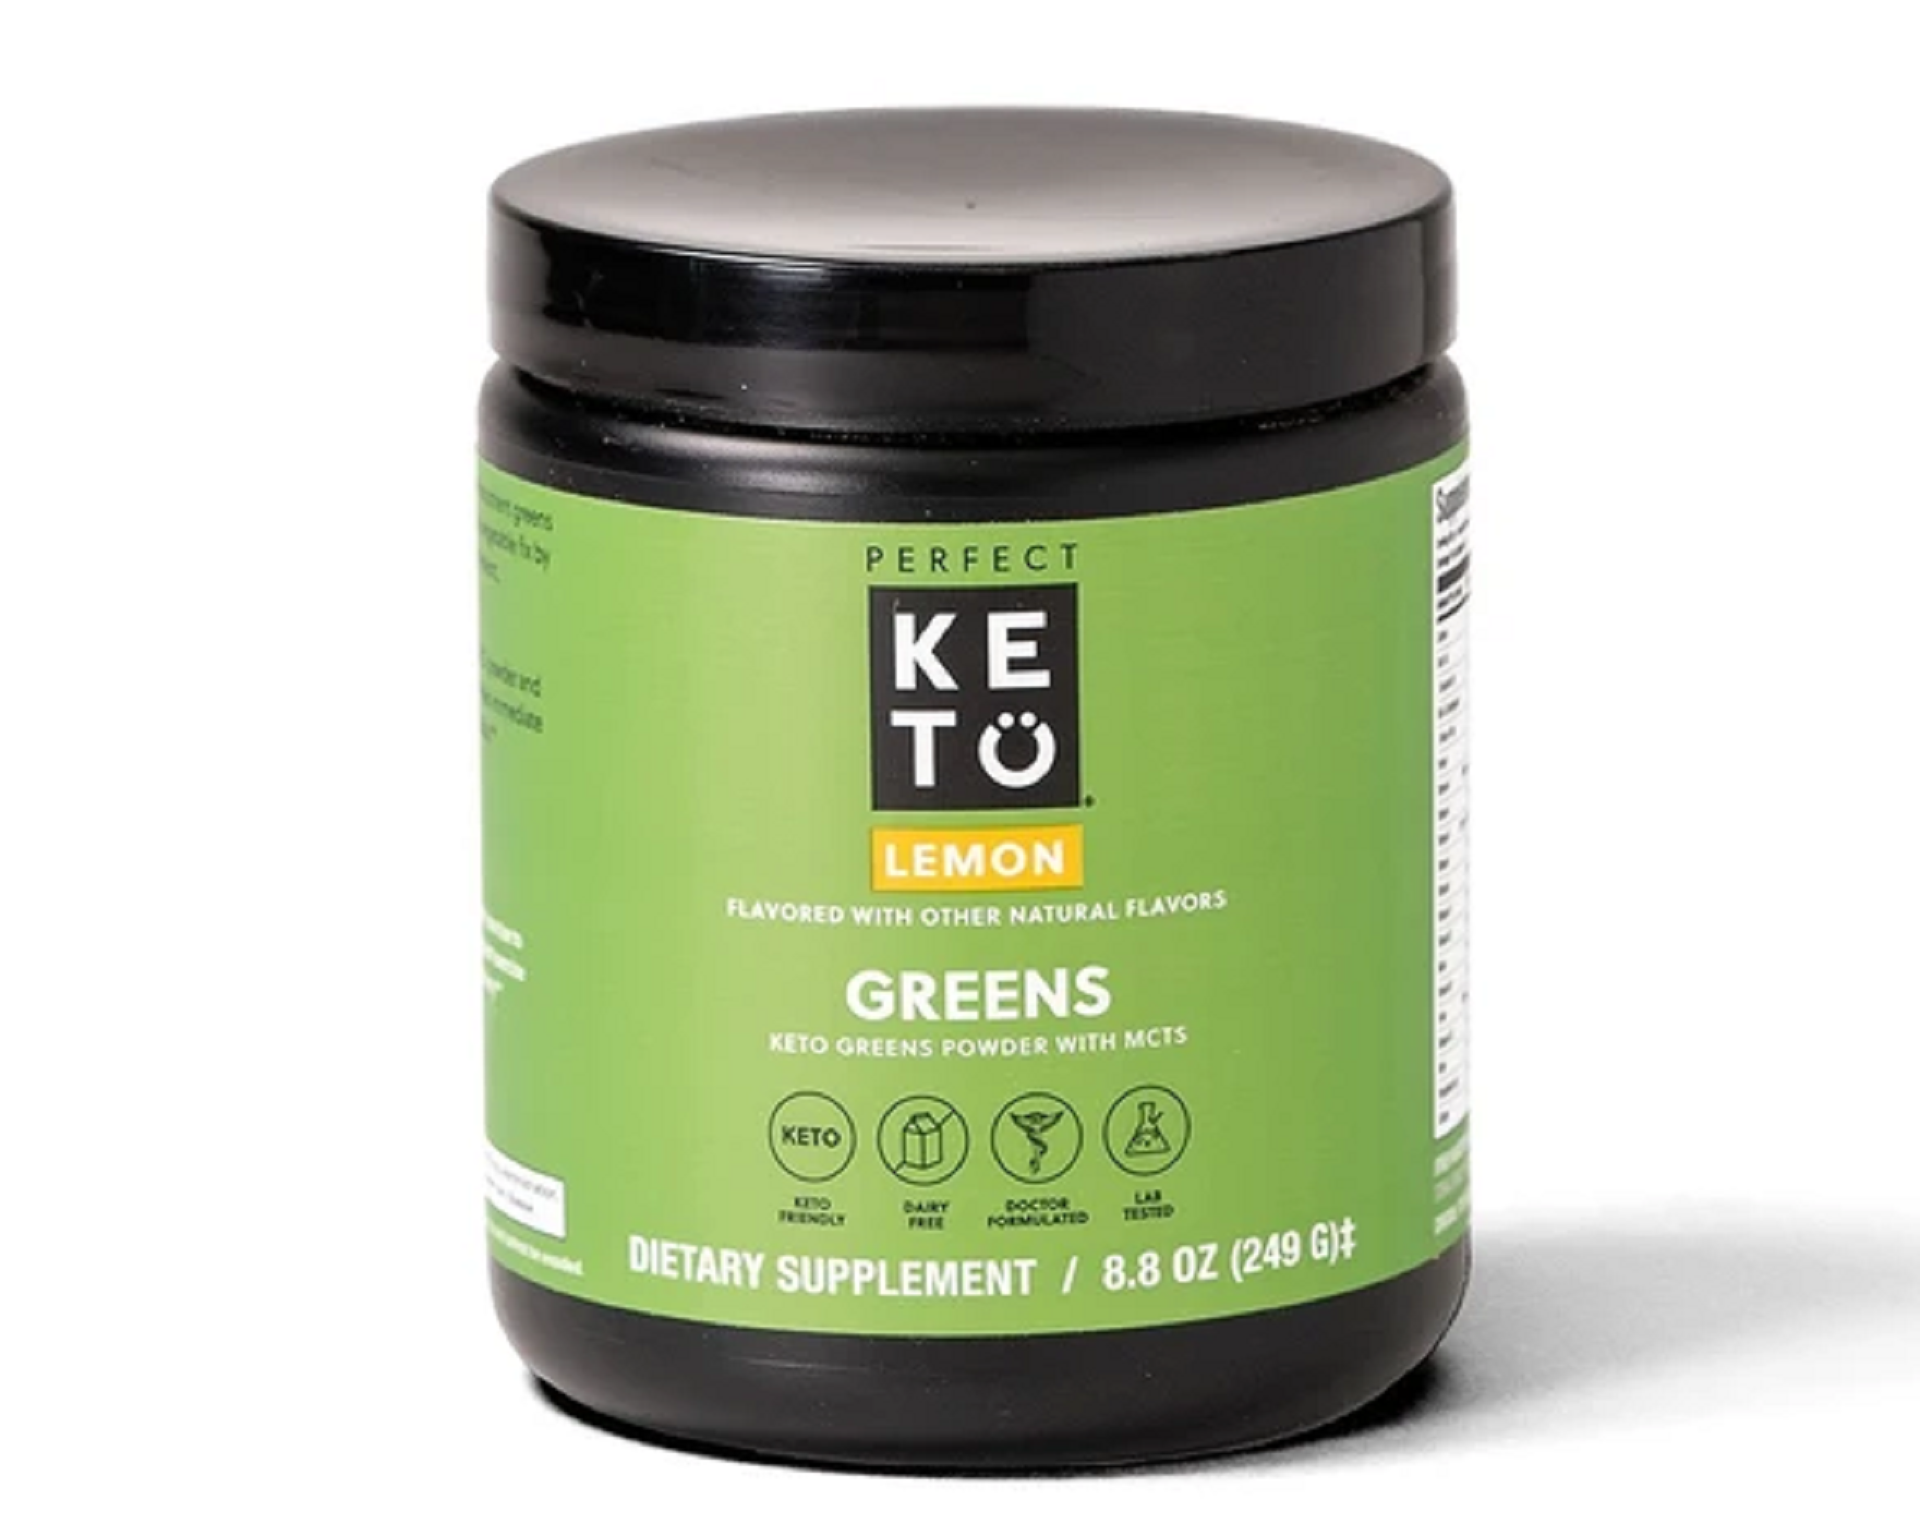 keto greens powder with mcts